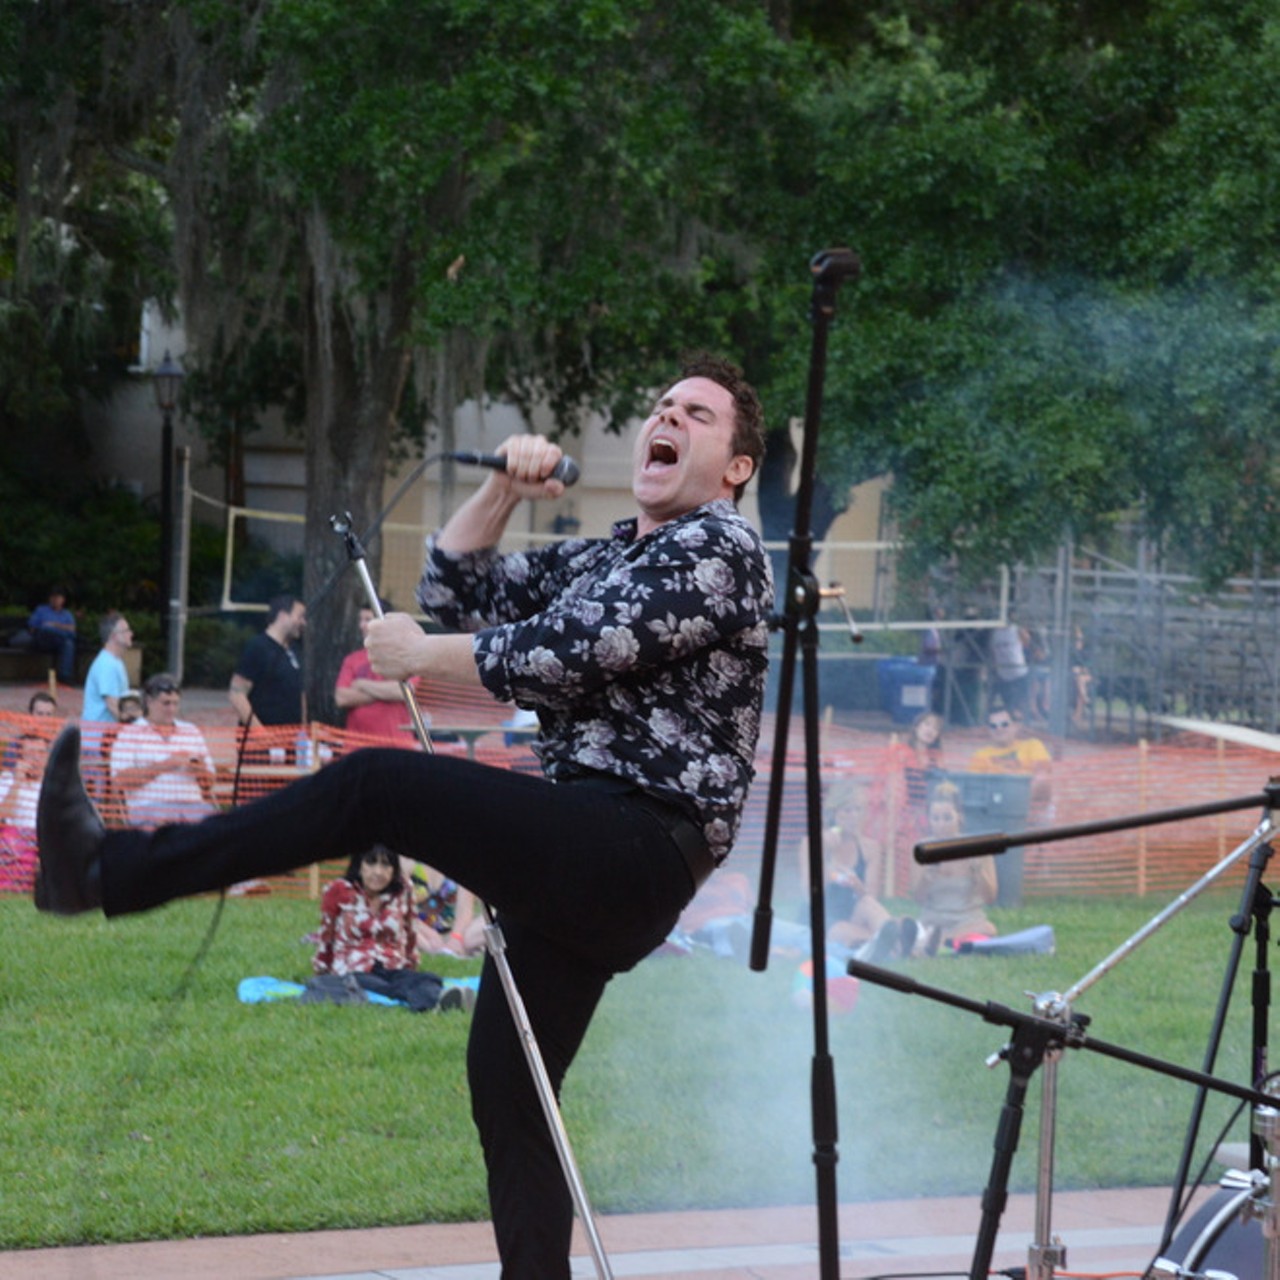 51 Fun Photos from Fox Fest at Rollins College